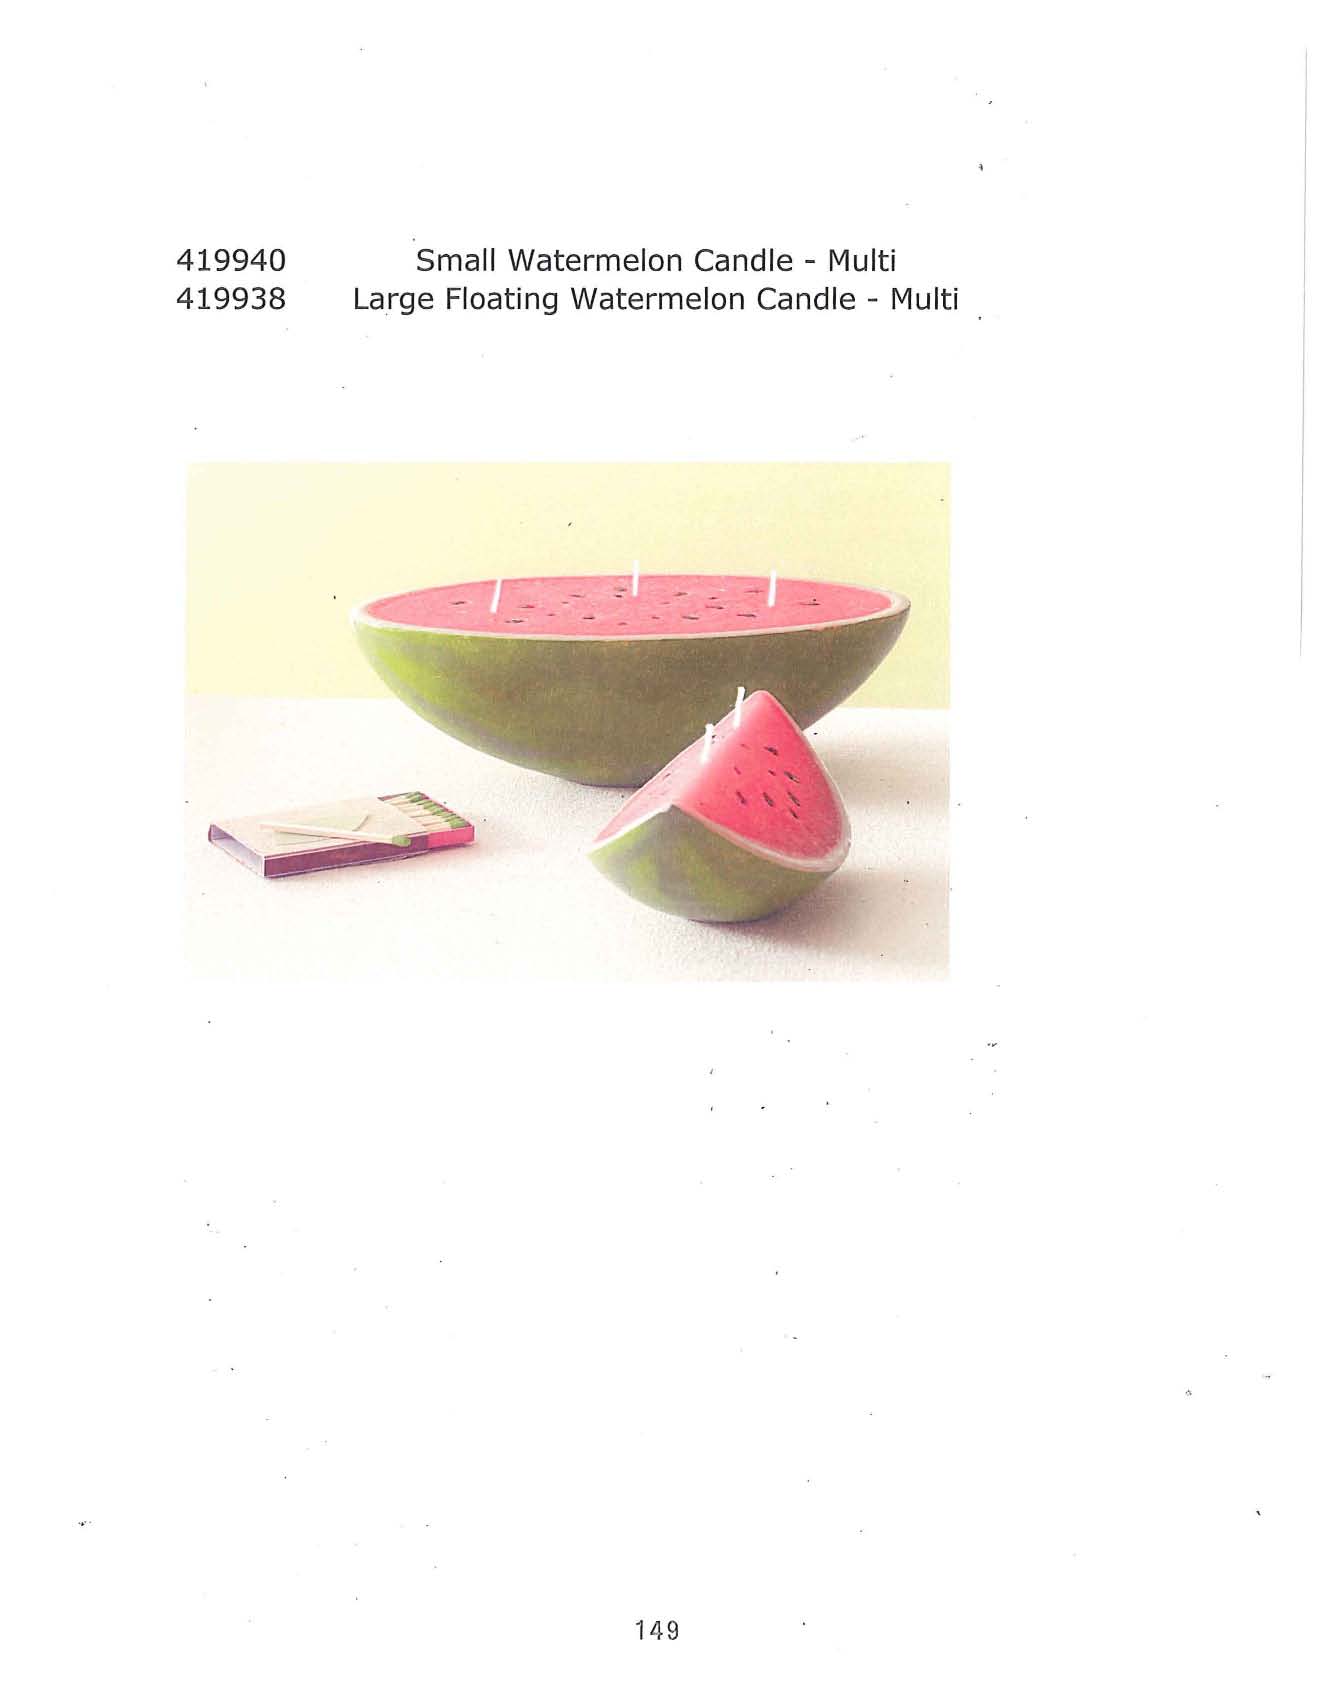 Small Watermelon Candle and Large Floating Watermelon Candle - Multi